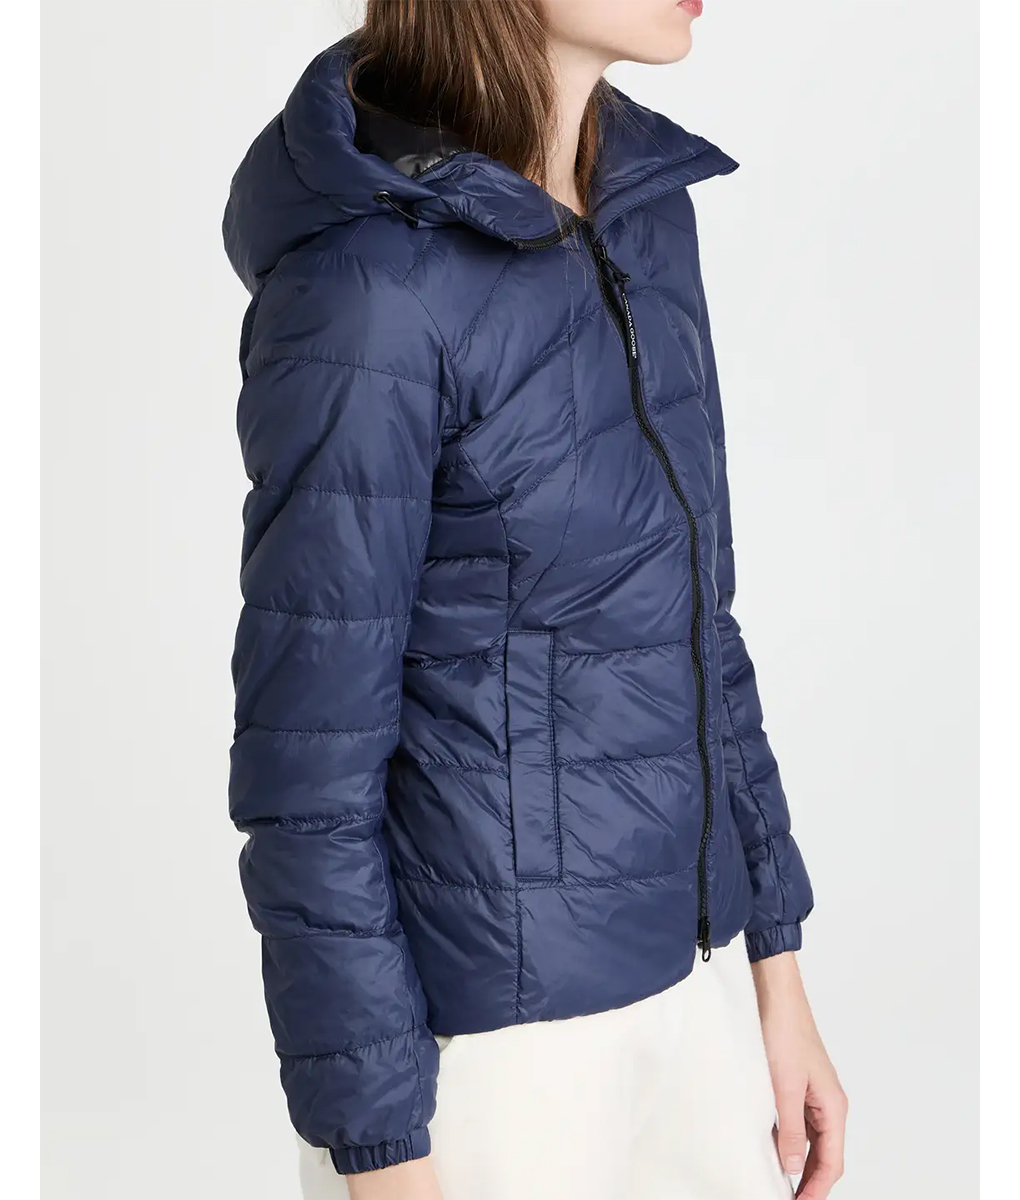 The Other Zoey Zoey Miller Puffer Hooded Jacket